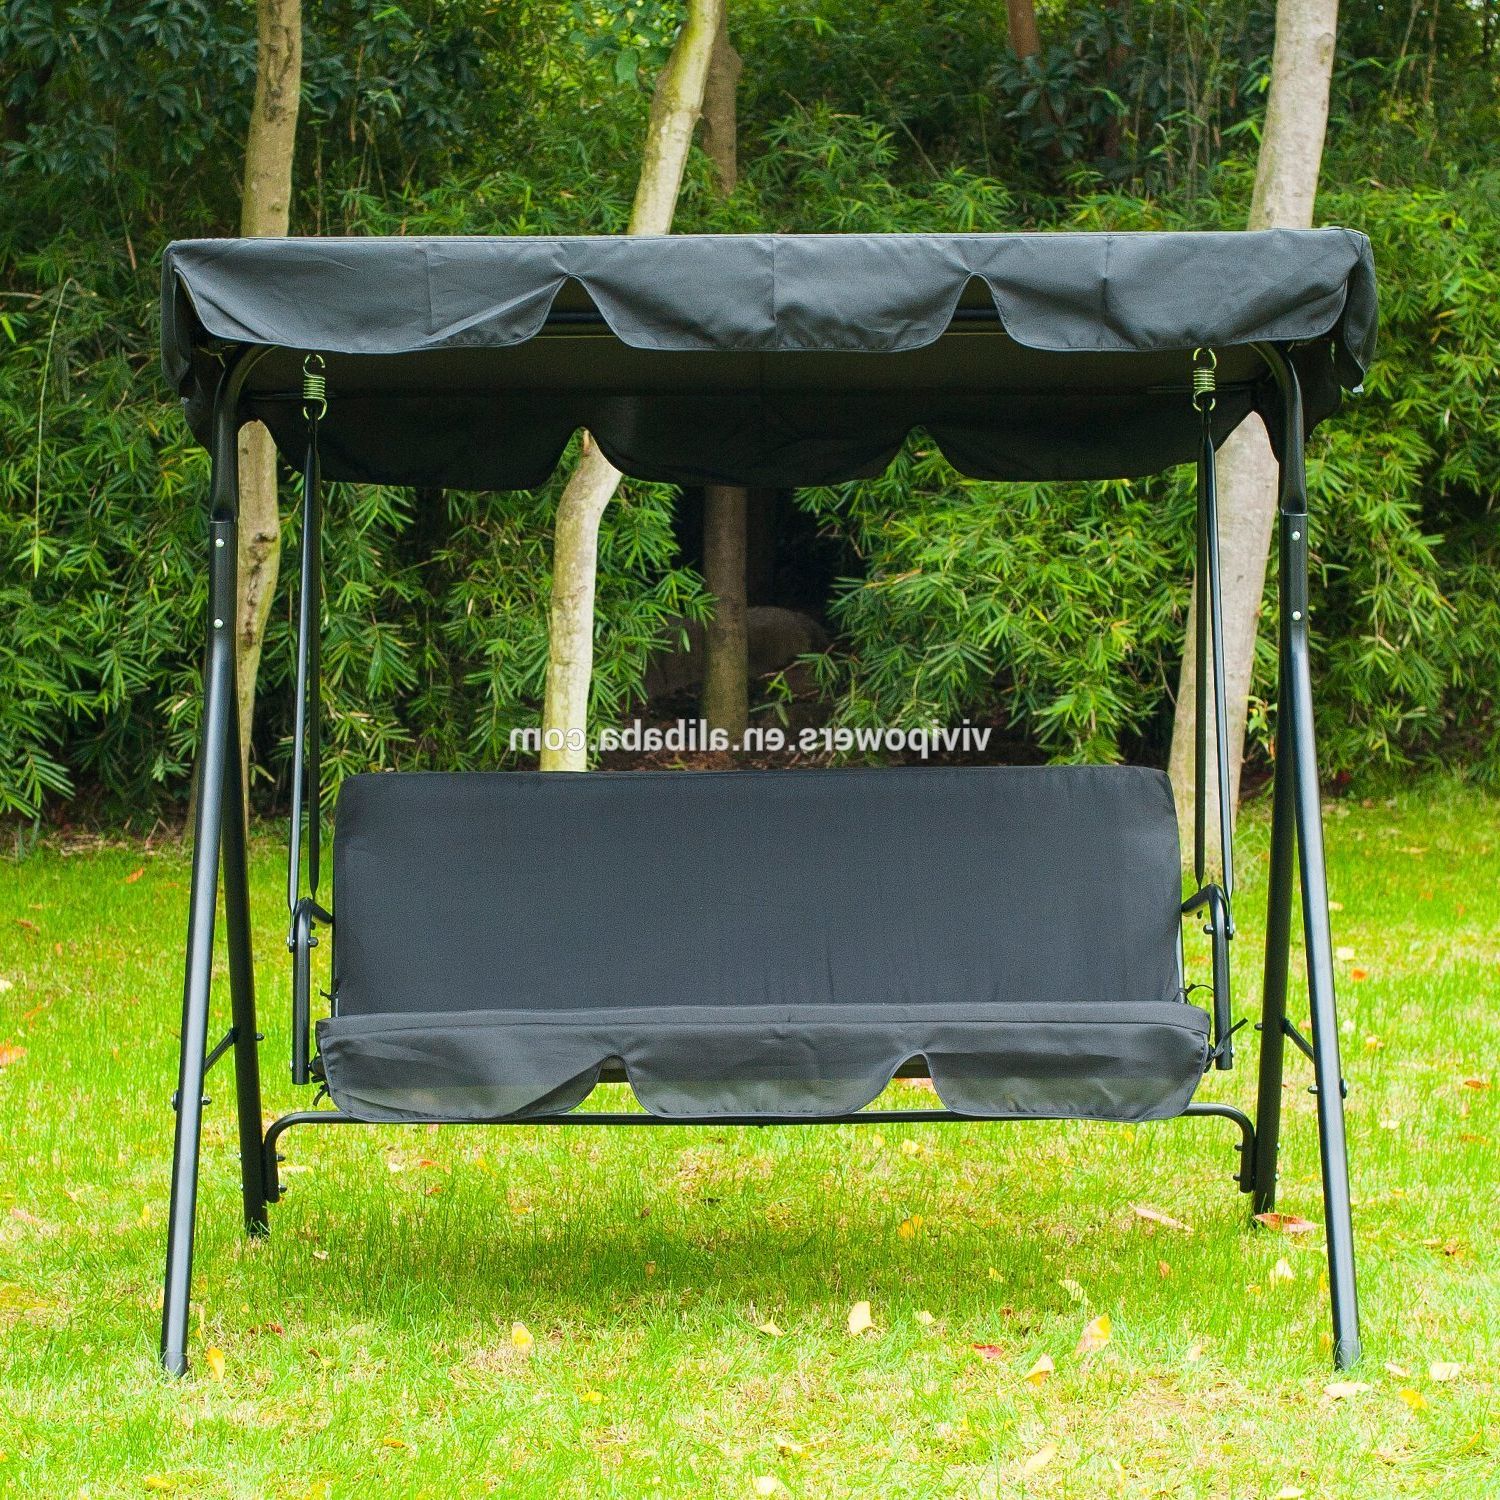 Favorite Garden Patio Swing Chair 3 Seater Swinging Hammock Canopy Outdoor Cushioned  Bench Bed Seat – Buy Outdoor Garden Swing Chair Set,patio Swing Bench With 3 Seater Swings With Frame And Canopy (View 6 of 30)